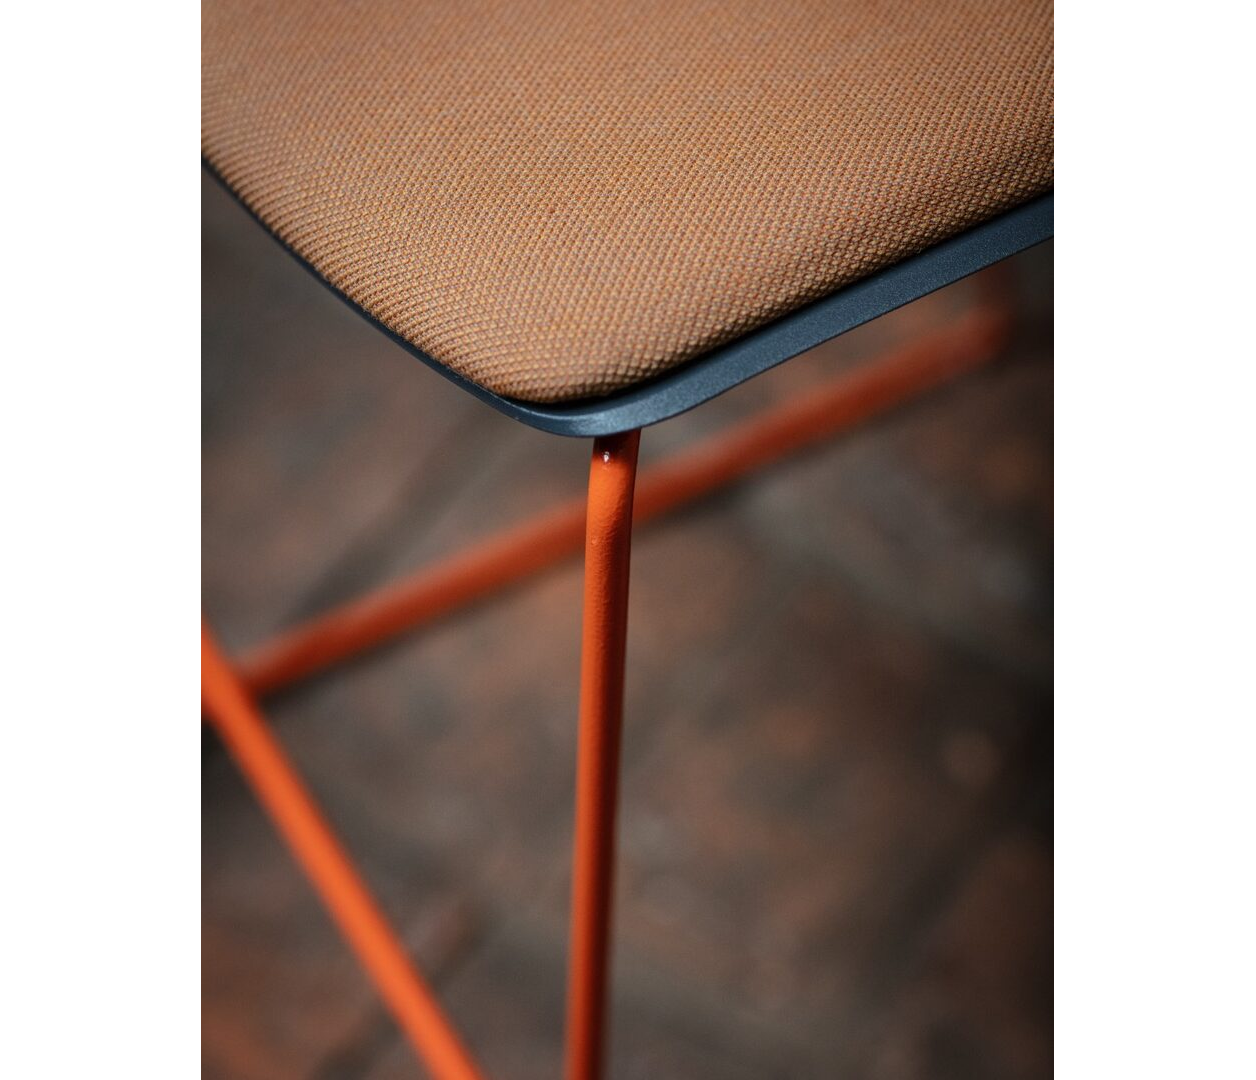 OCEE&FOUR – Chairs – FourSure 105 – Details Image 3 Large